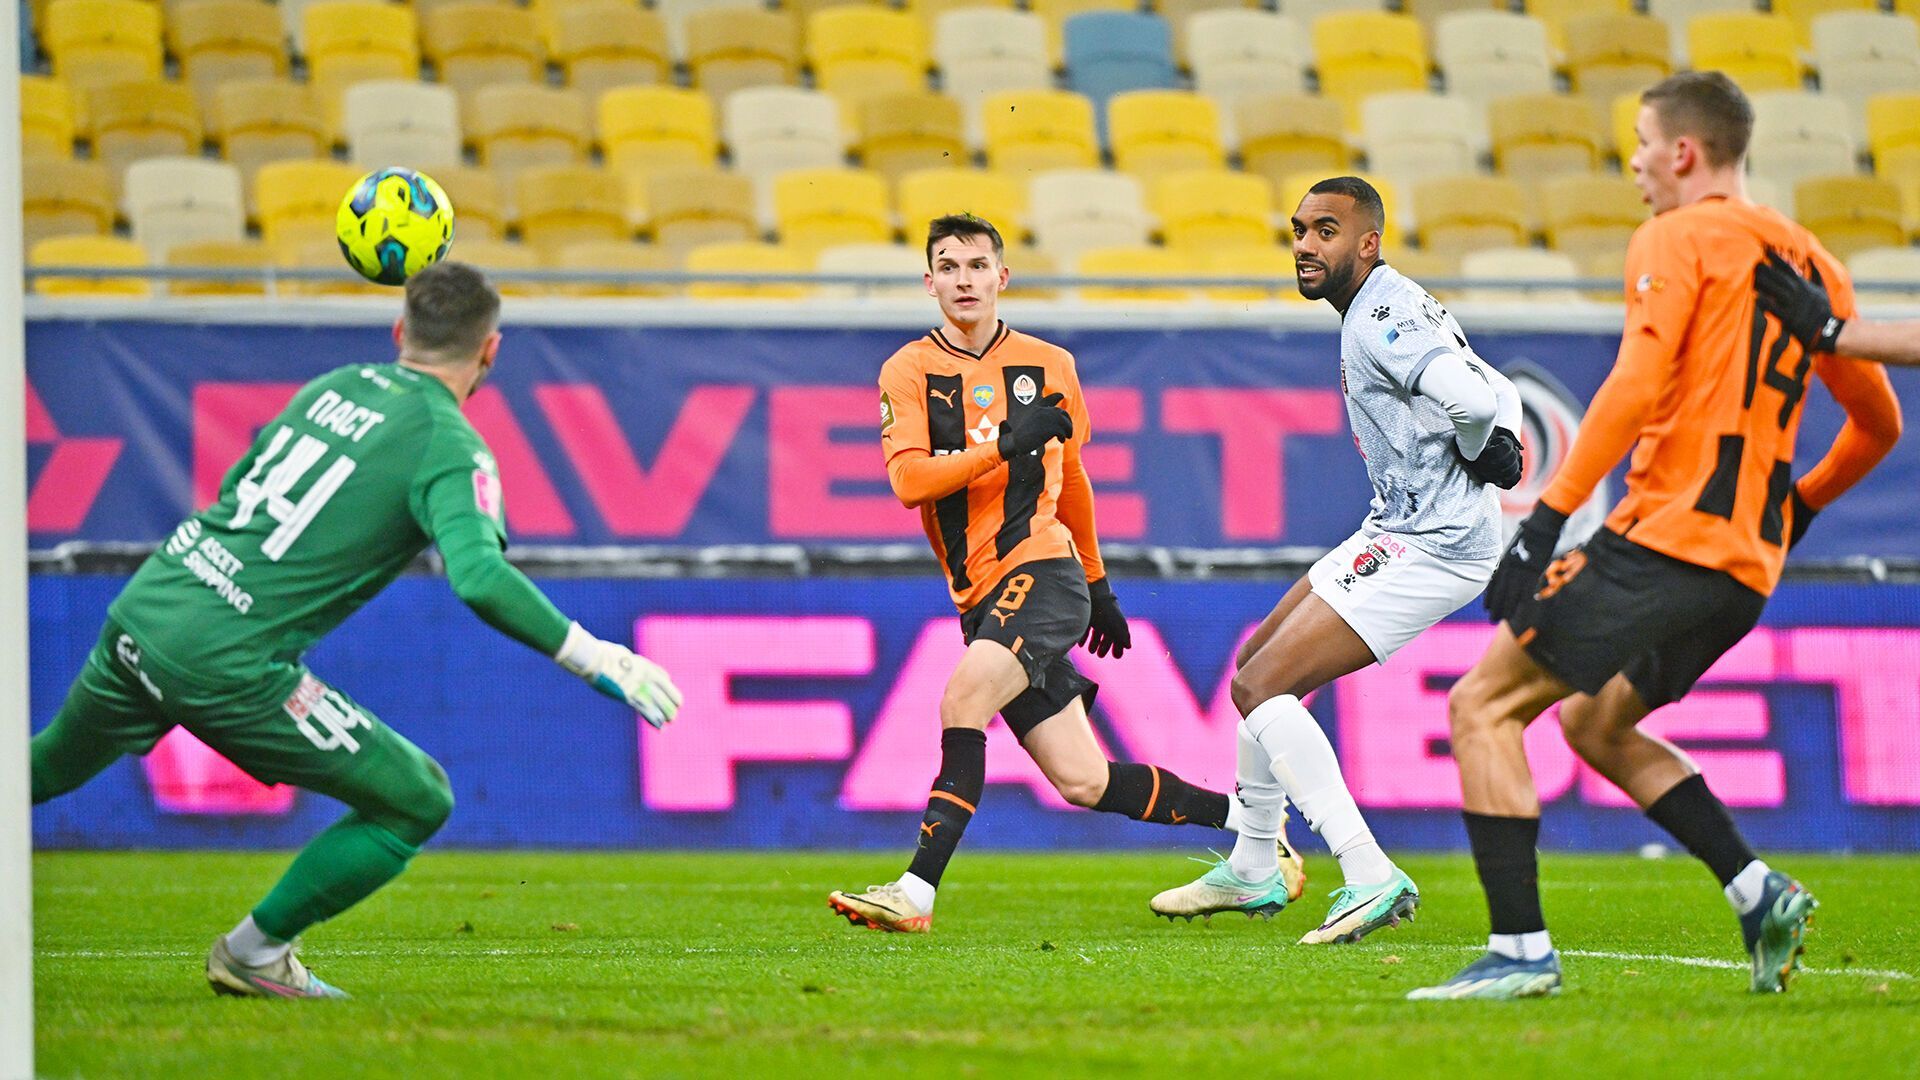 Monzul provoked a scandal: Shakhtar's UPL match turned into a refereeing circus. Video